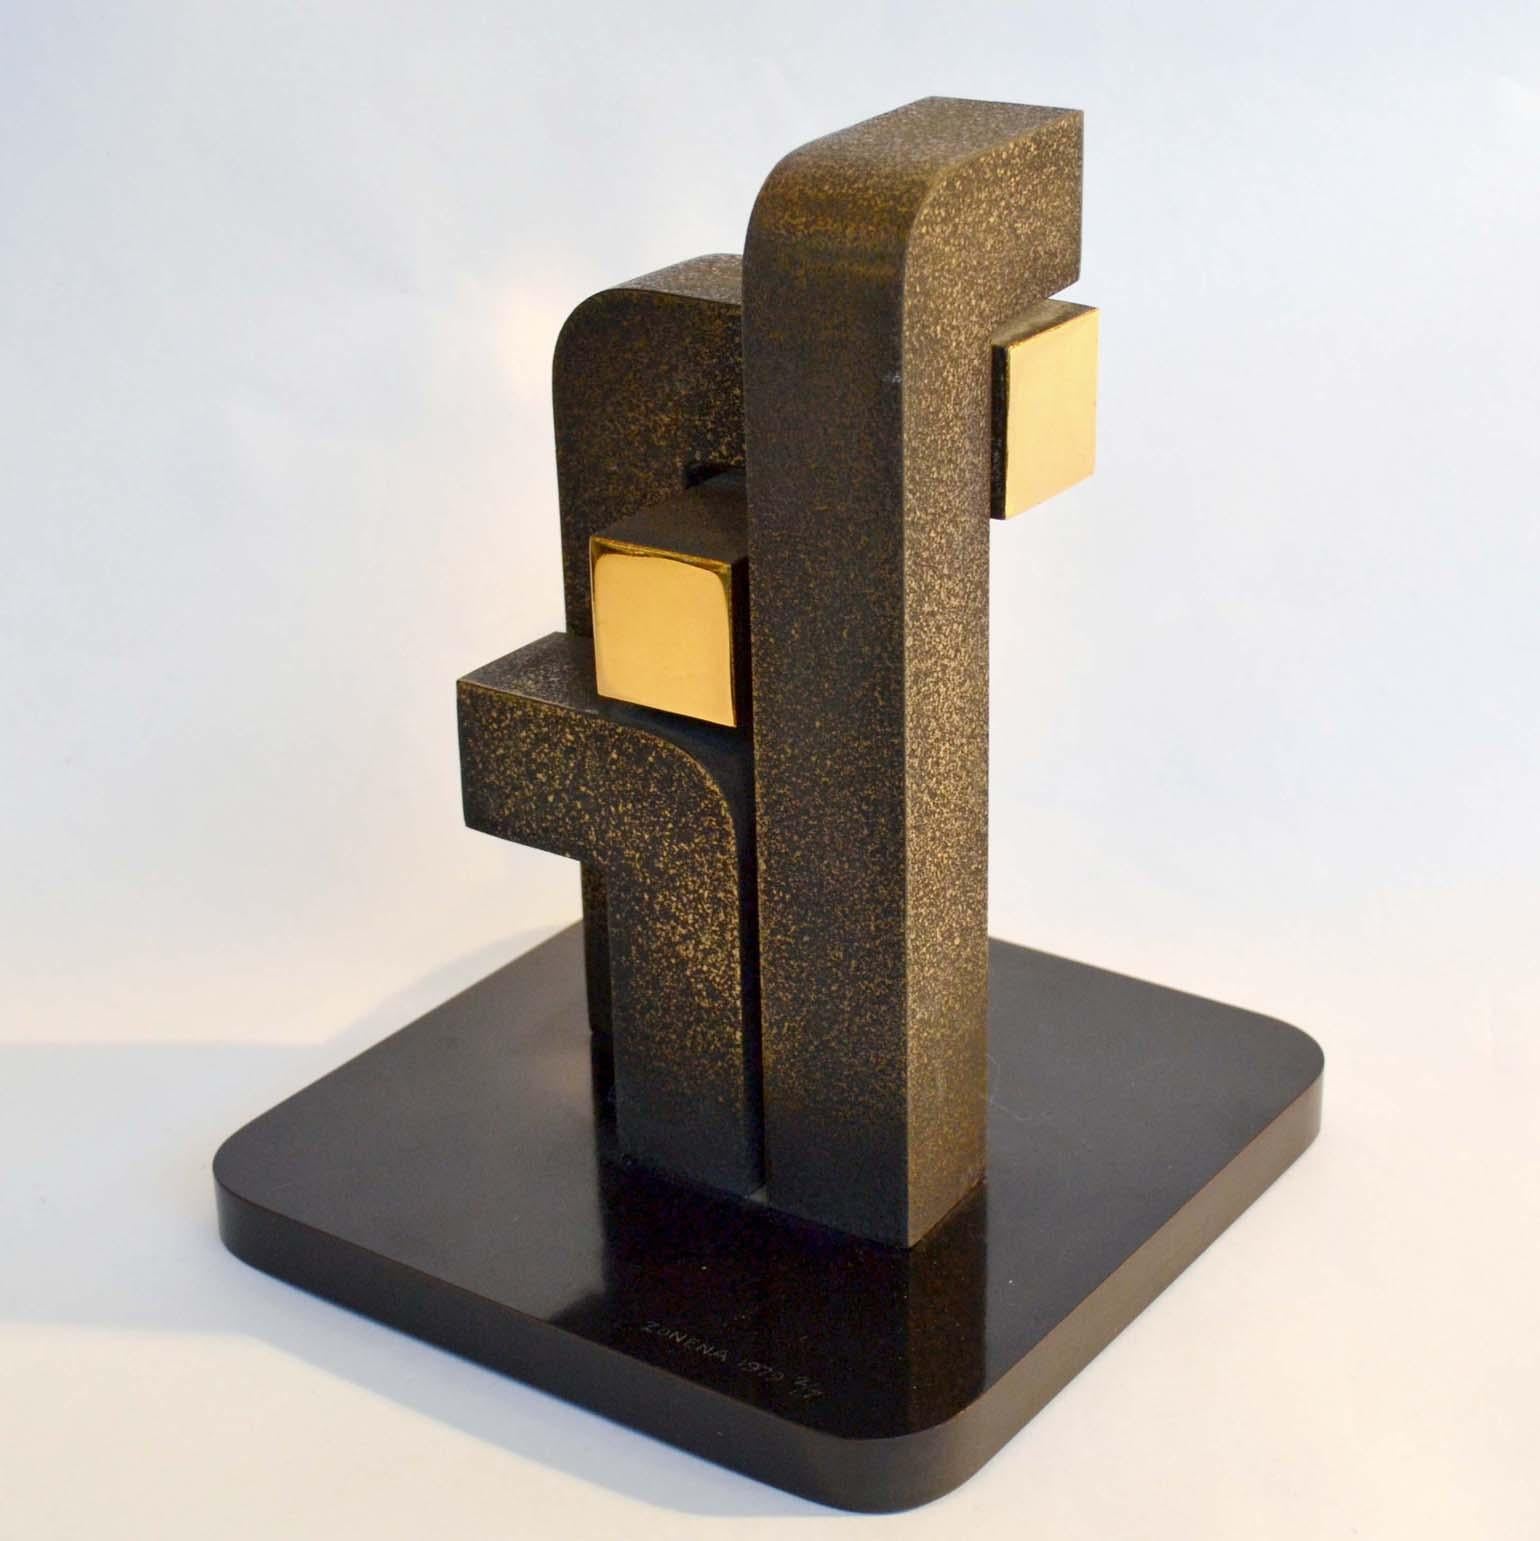 European Abstract Geometric Minimalist Bronze Sculpture by Zonena 1979 in Limited Edition